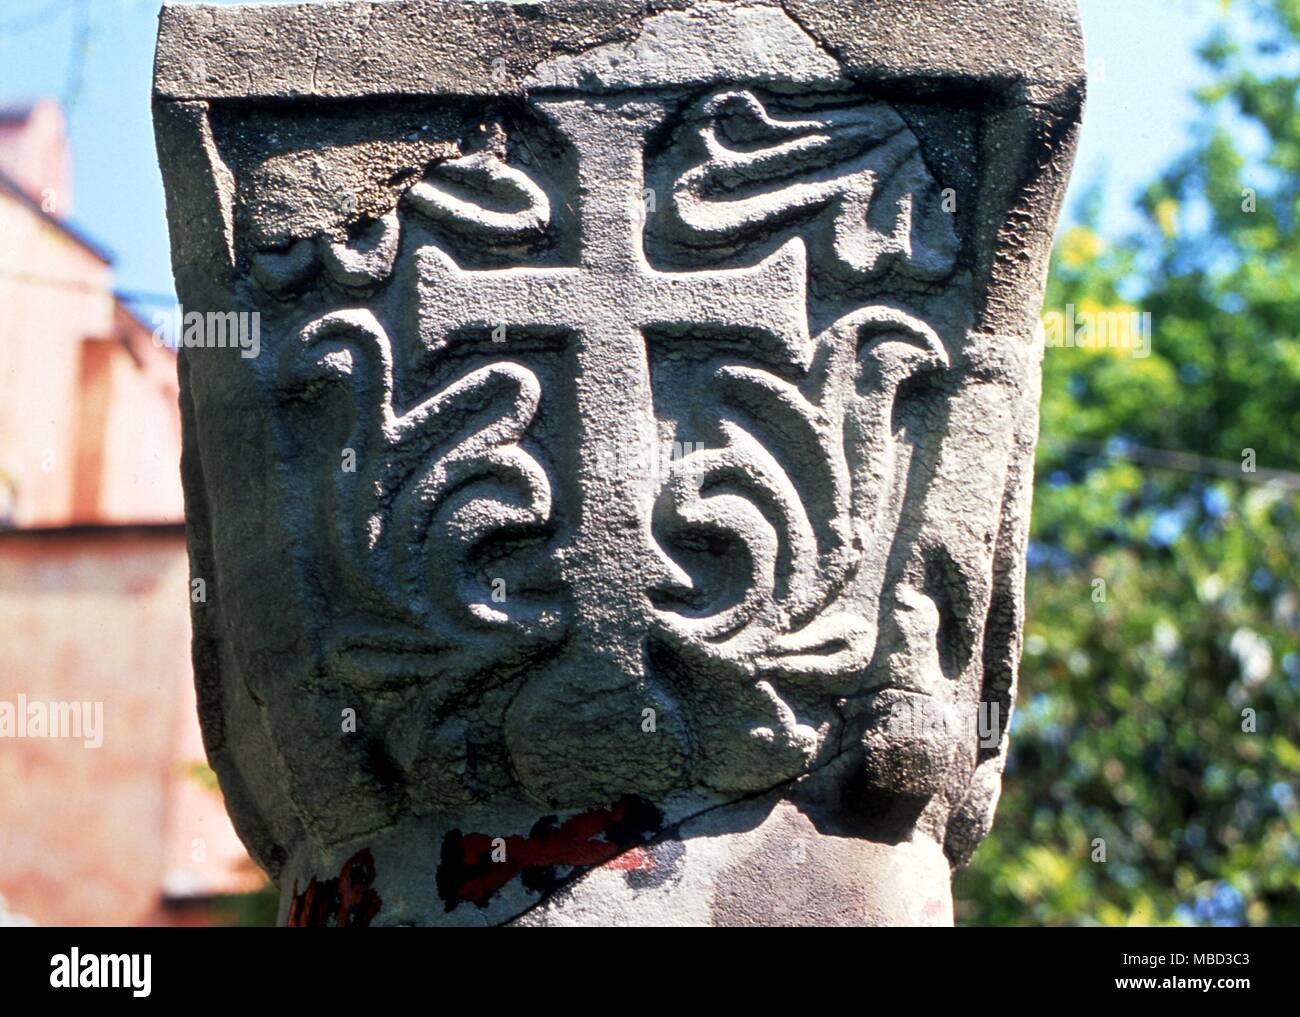 Symbols - Cross. The cross surrounded by floriations to symbolize the resurrection. Stock Photo